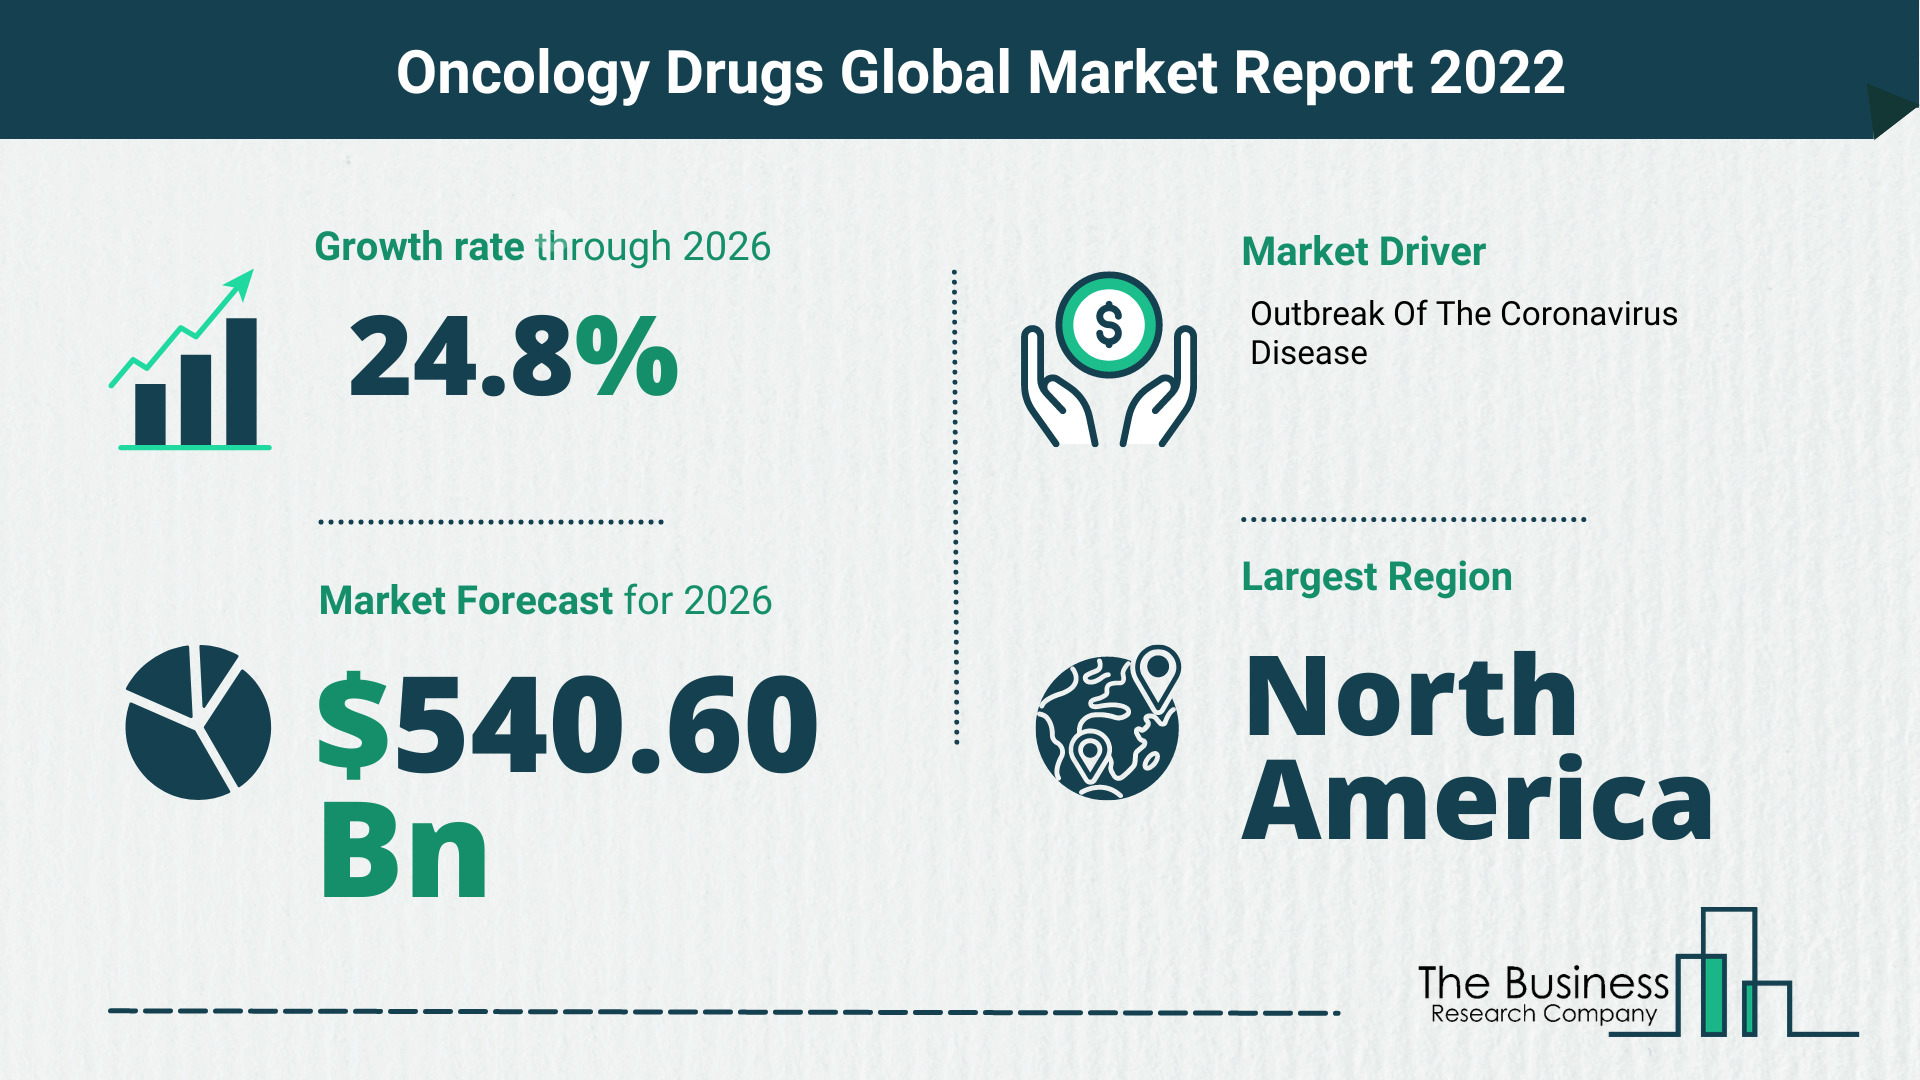 The Oncology Drugs Market Share, Market Size, And Growth Rate 2022